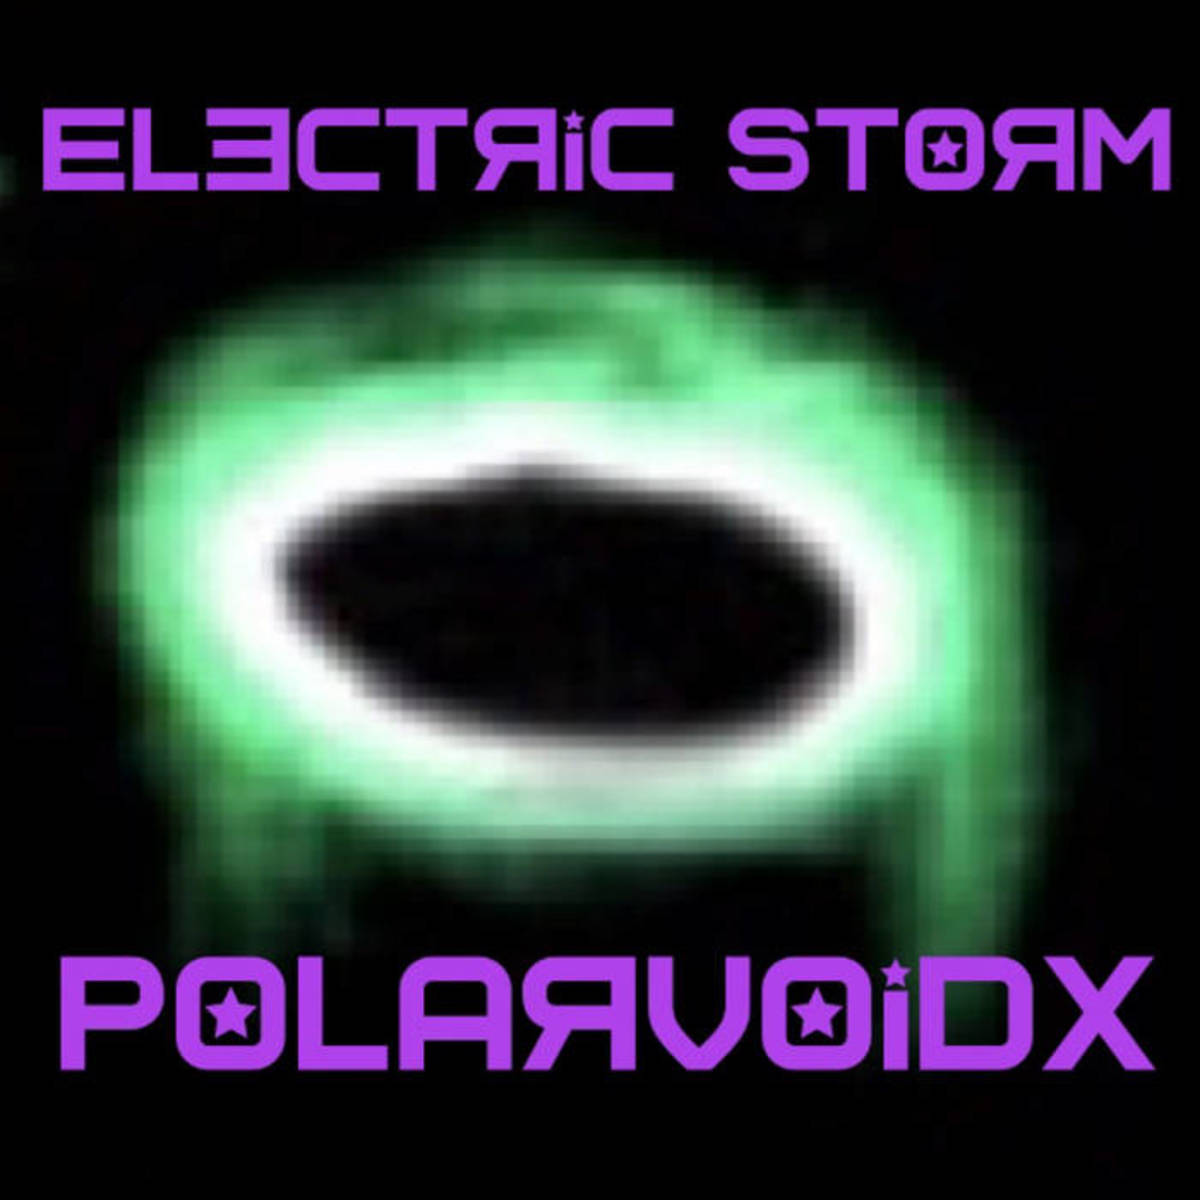 synth-single-review-electric-storm-by-polarvoidx